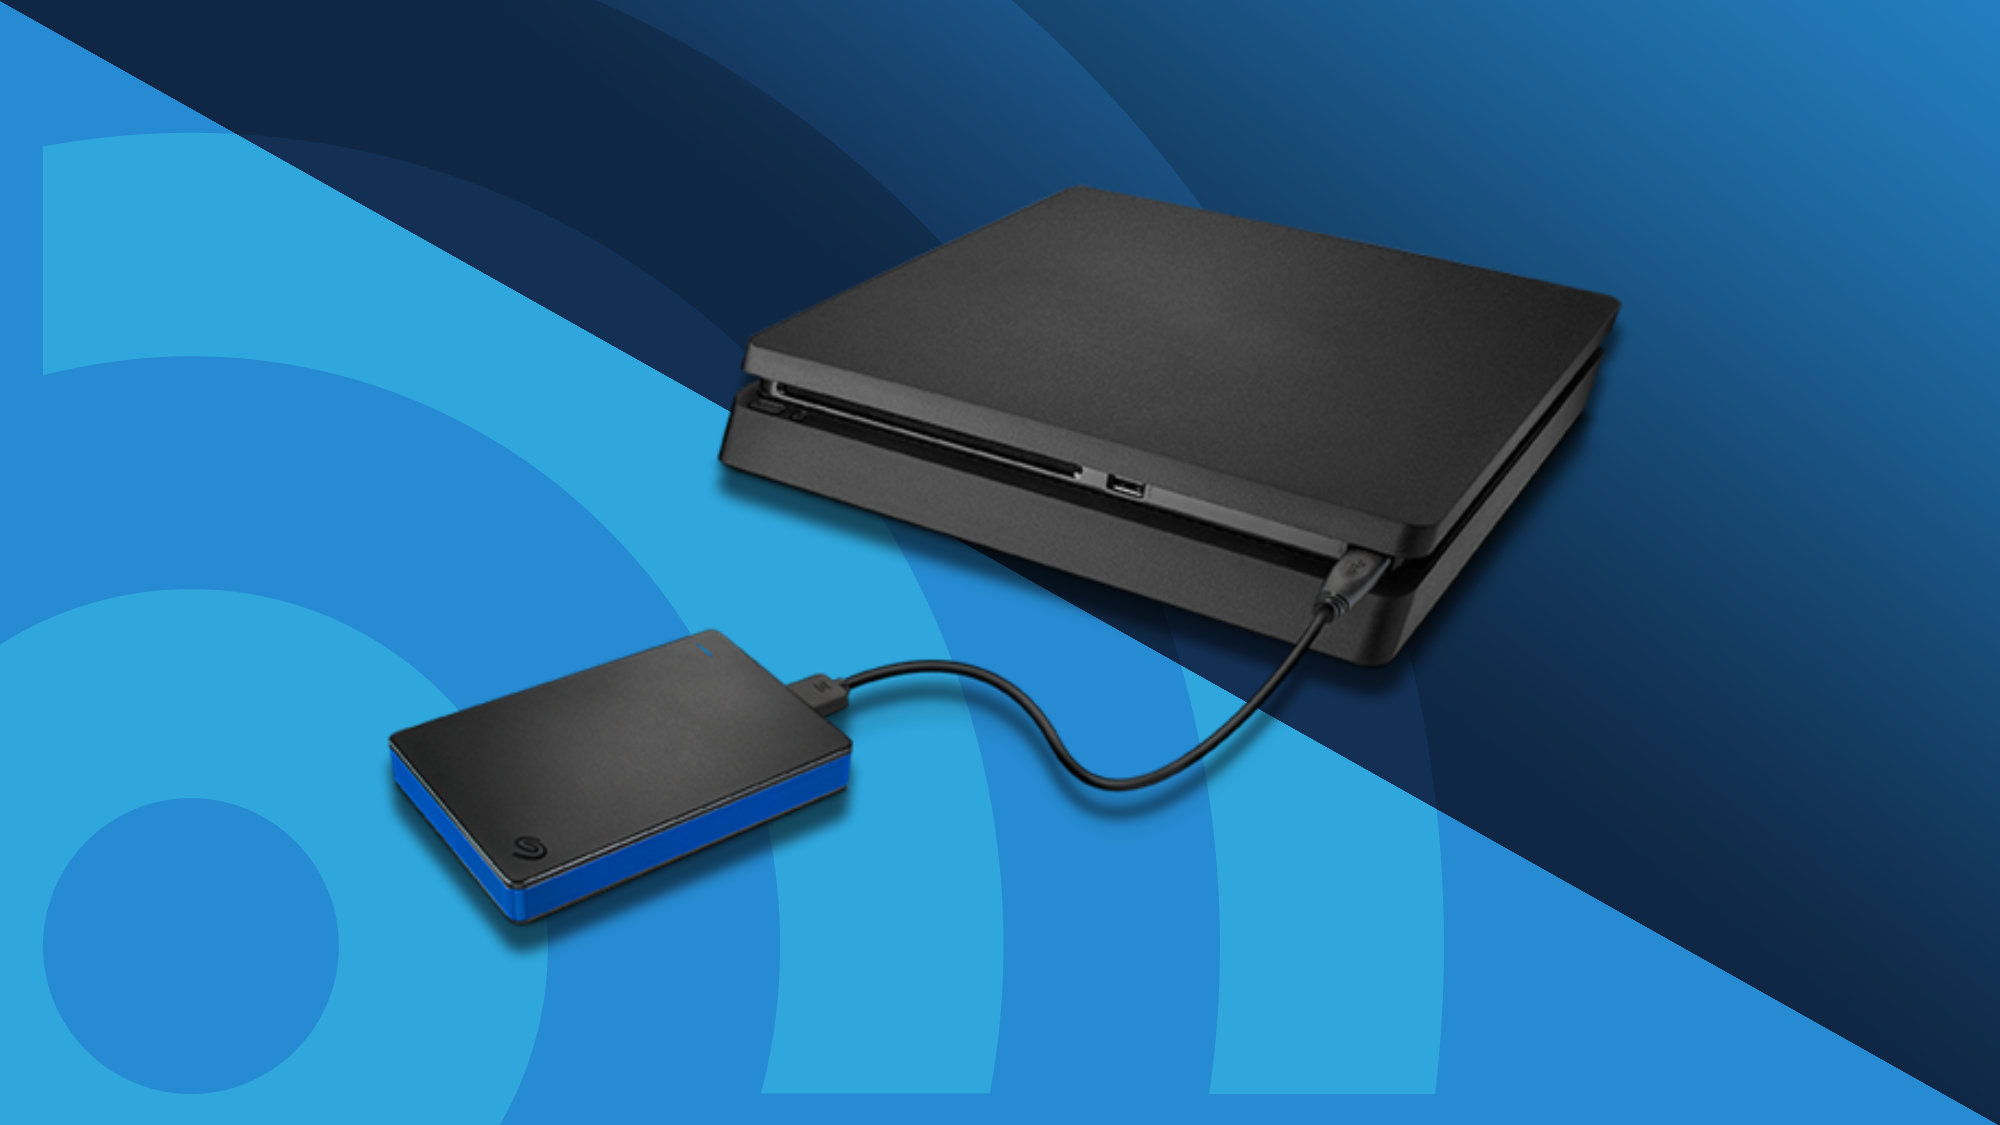 Seagate Firecuda 2TB review: the ultimate PS4 storage upgrade?